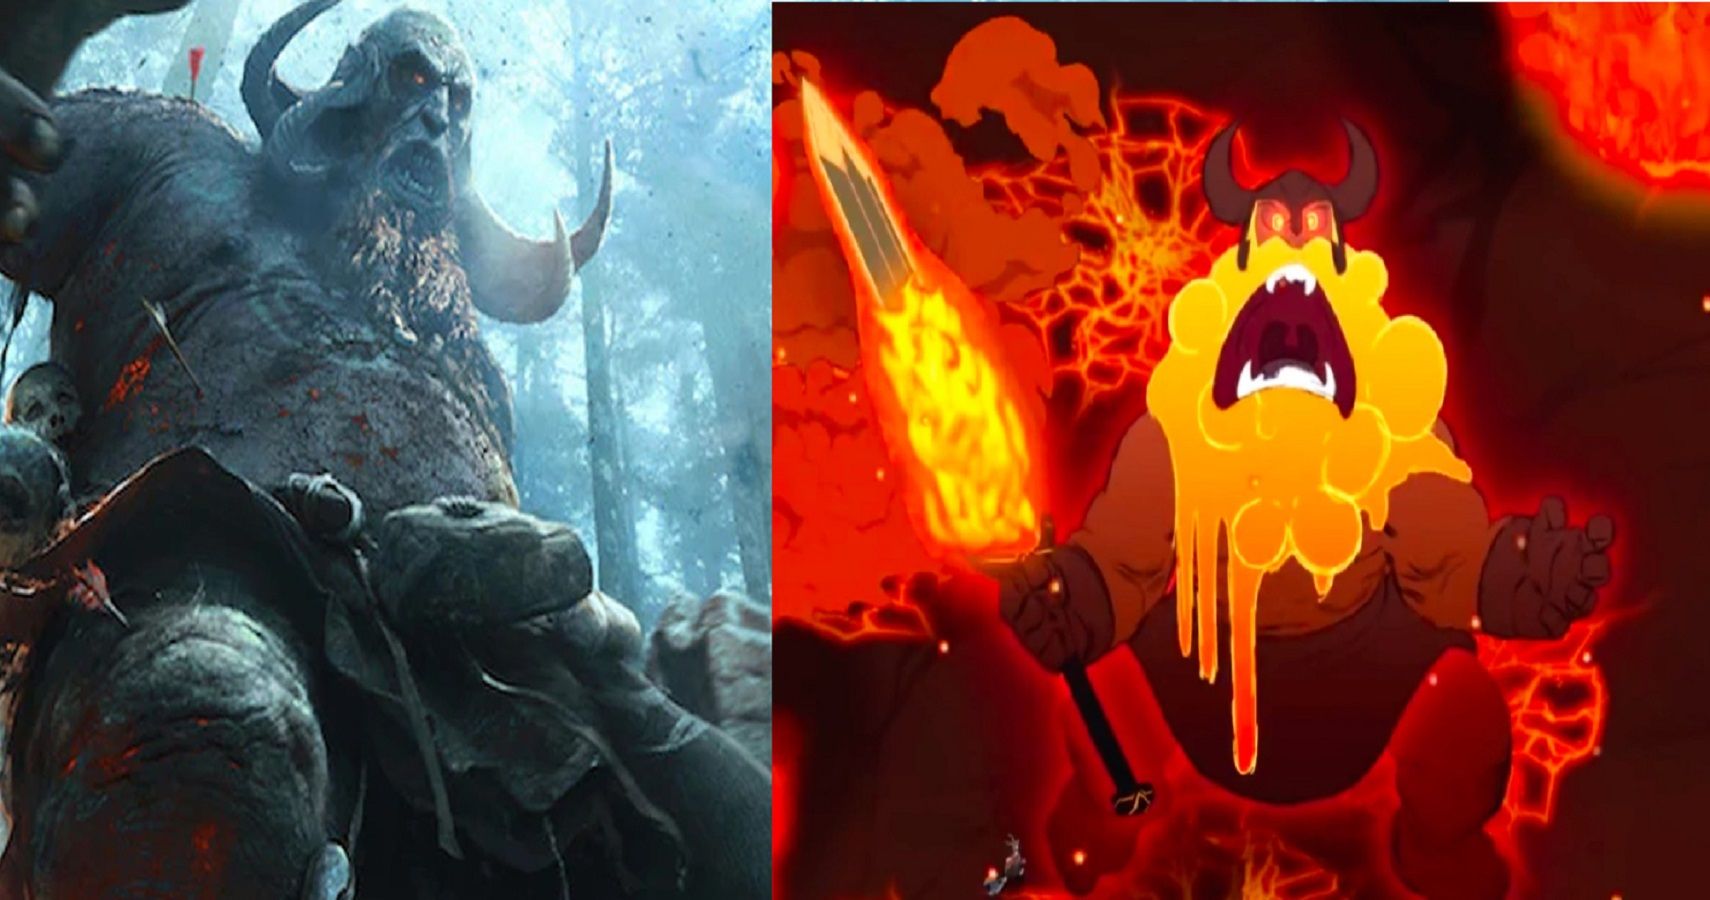 The 8 best Viking games to play before Assassin's Creed Valhalla